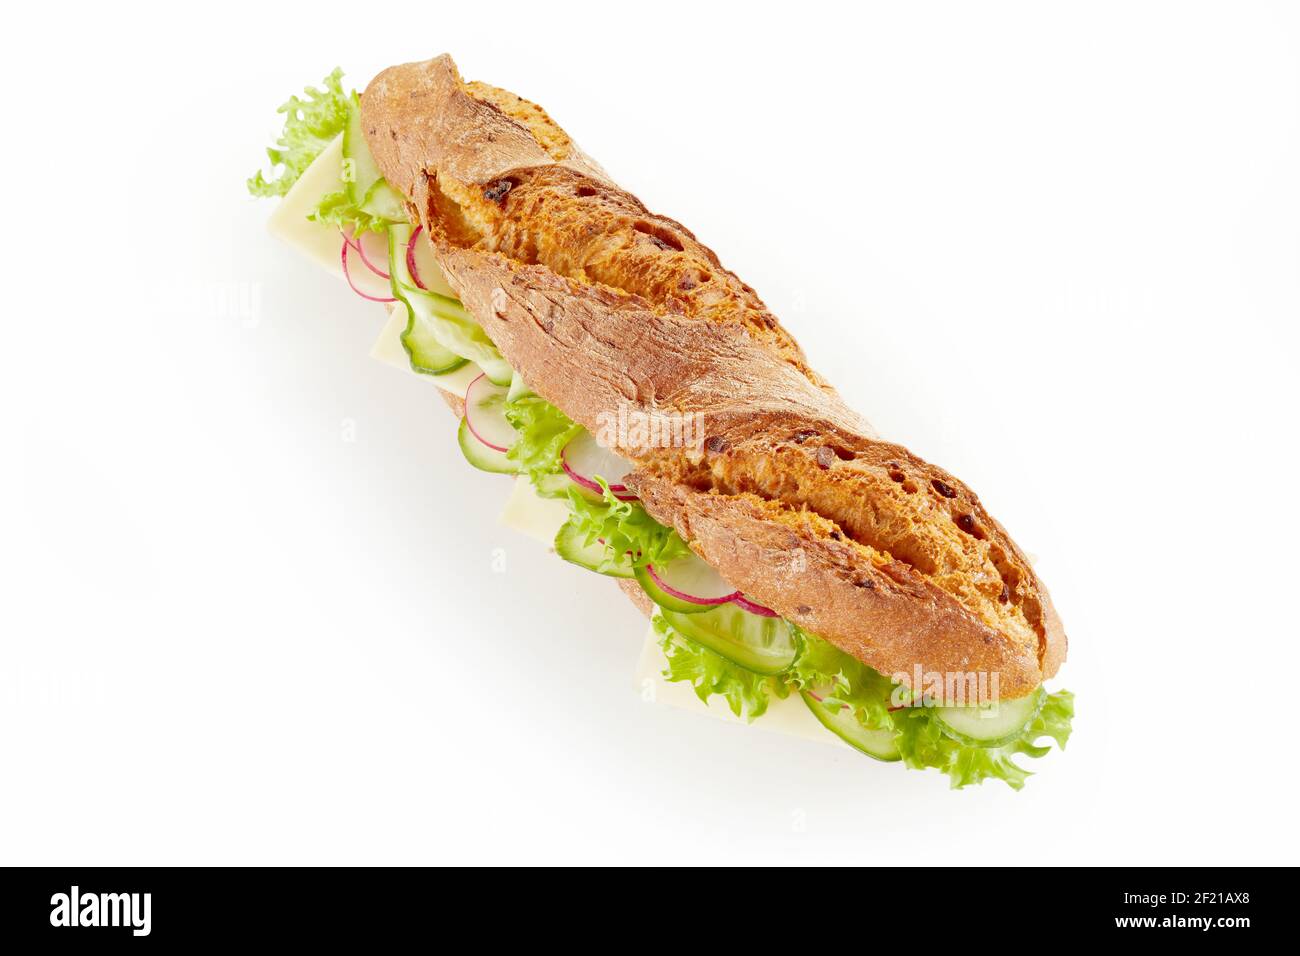 From above of nutritious baguette sandwich with vegetables and cheese slices served on white background Stock Photo